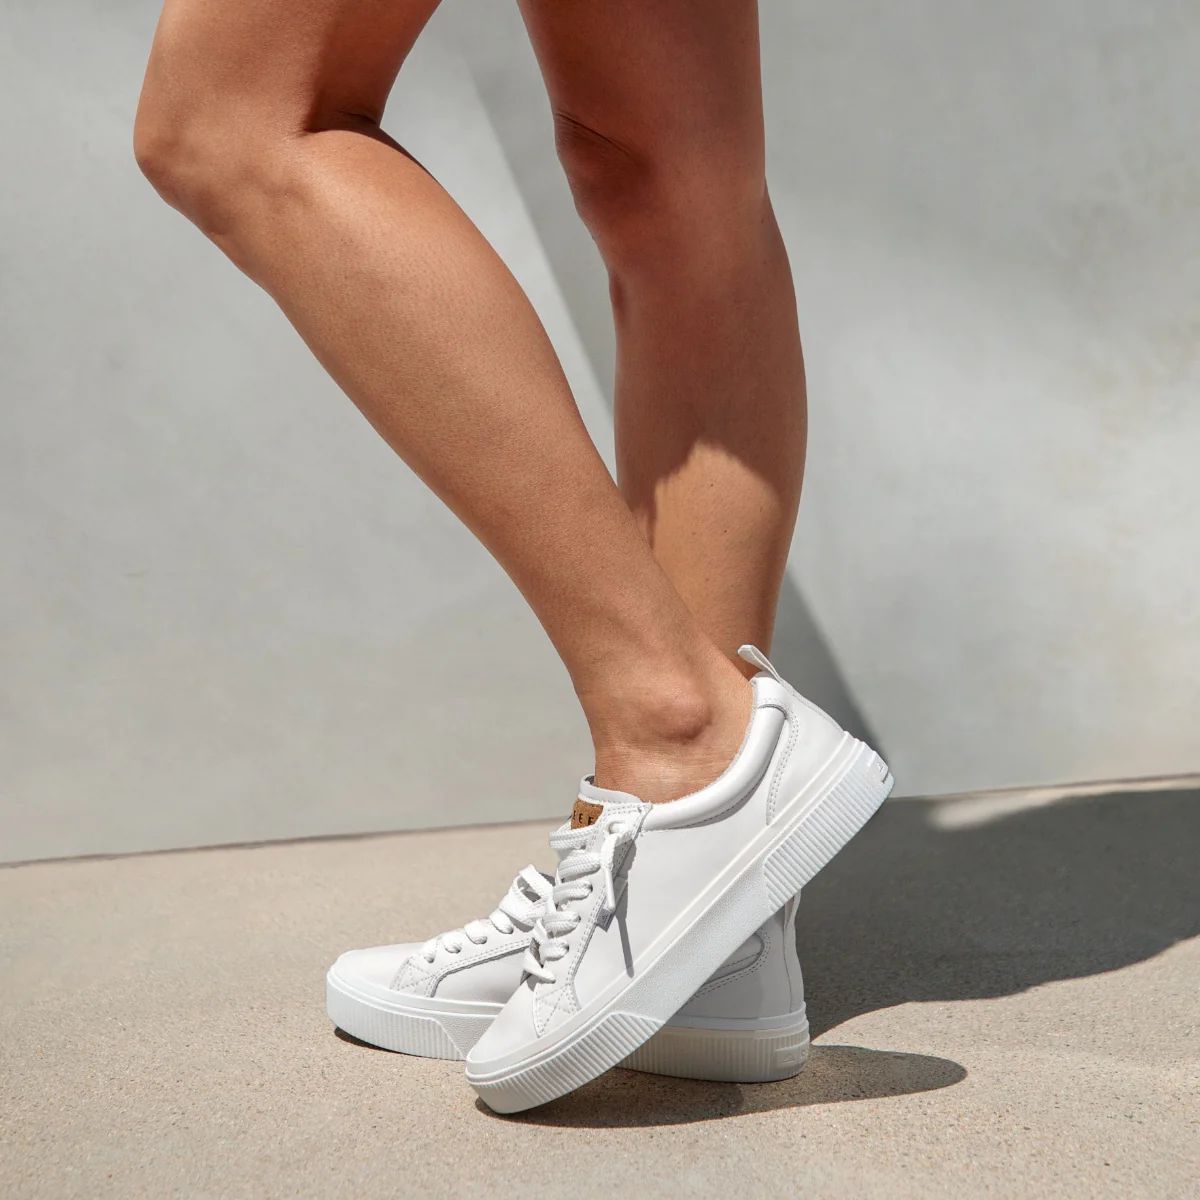 Lay Day Dawn: Women's White Leather Sneakers | REEF® | Reef